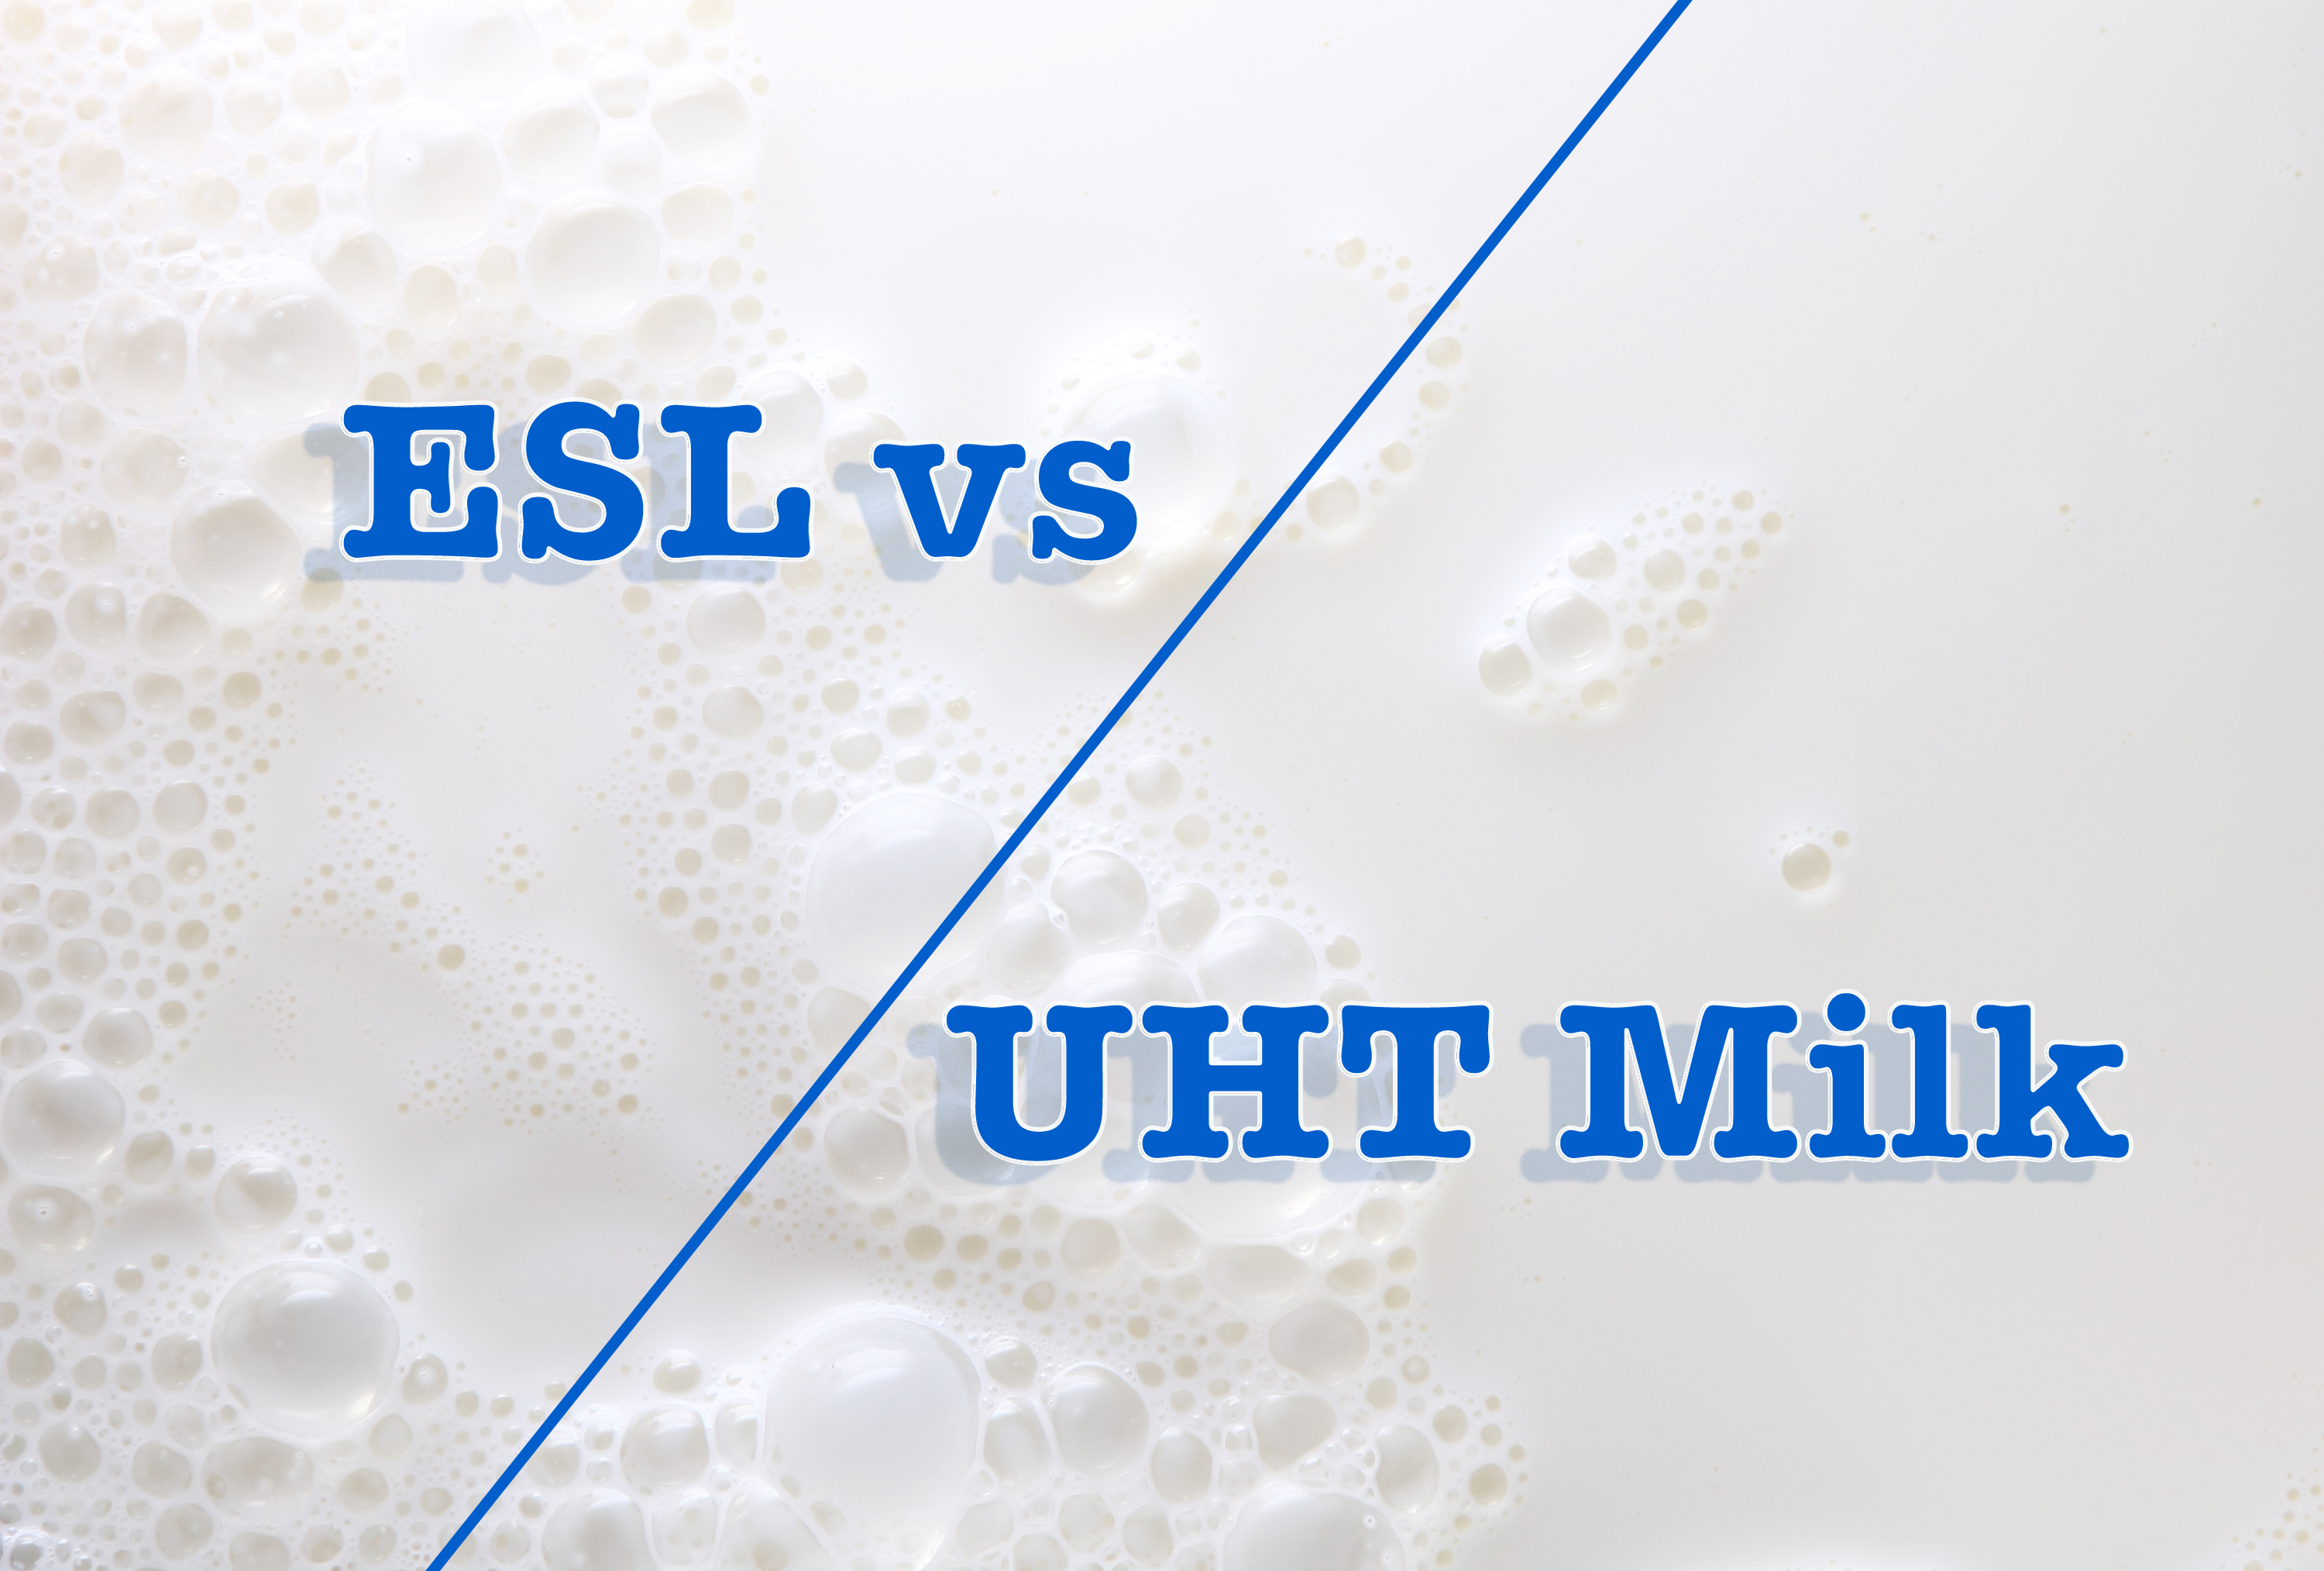 Everything you need to know about the difference between ESL and UHT milk